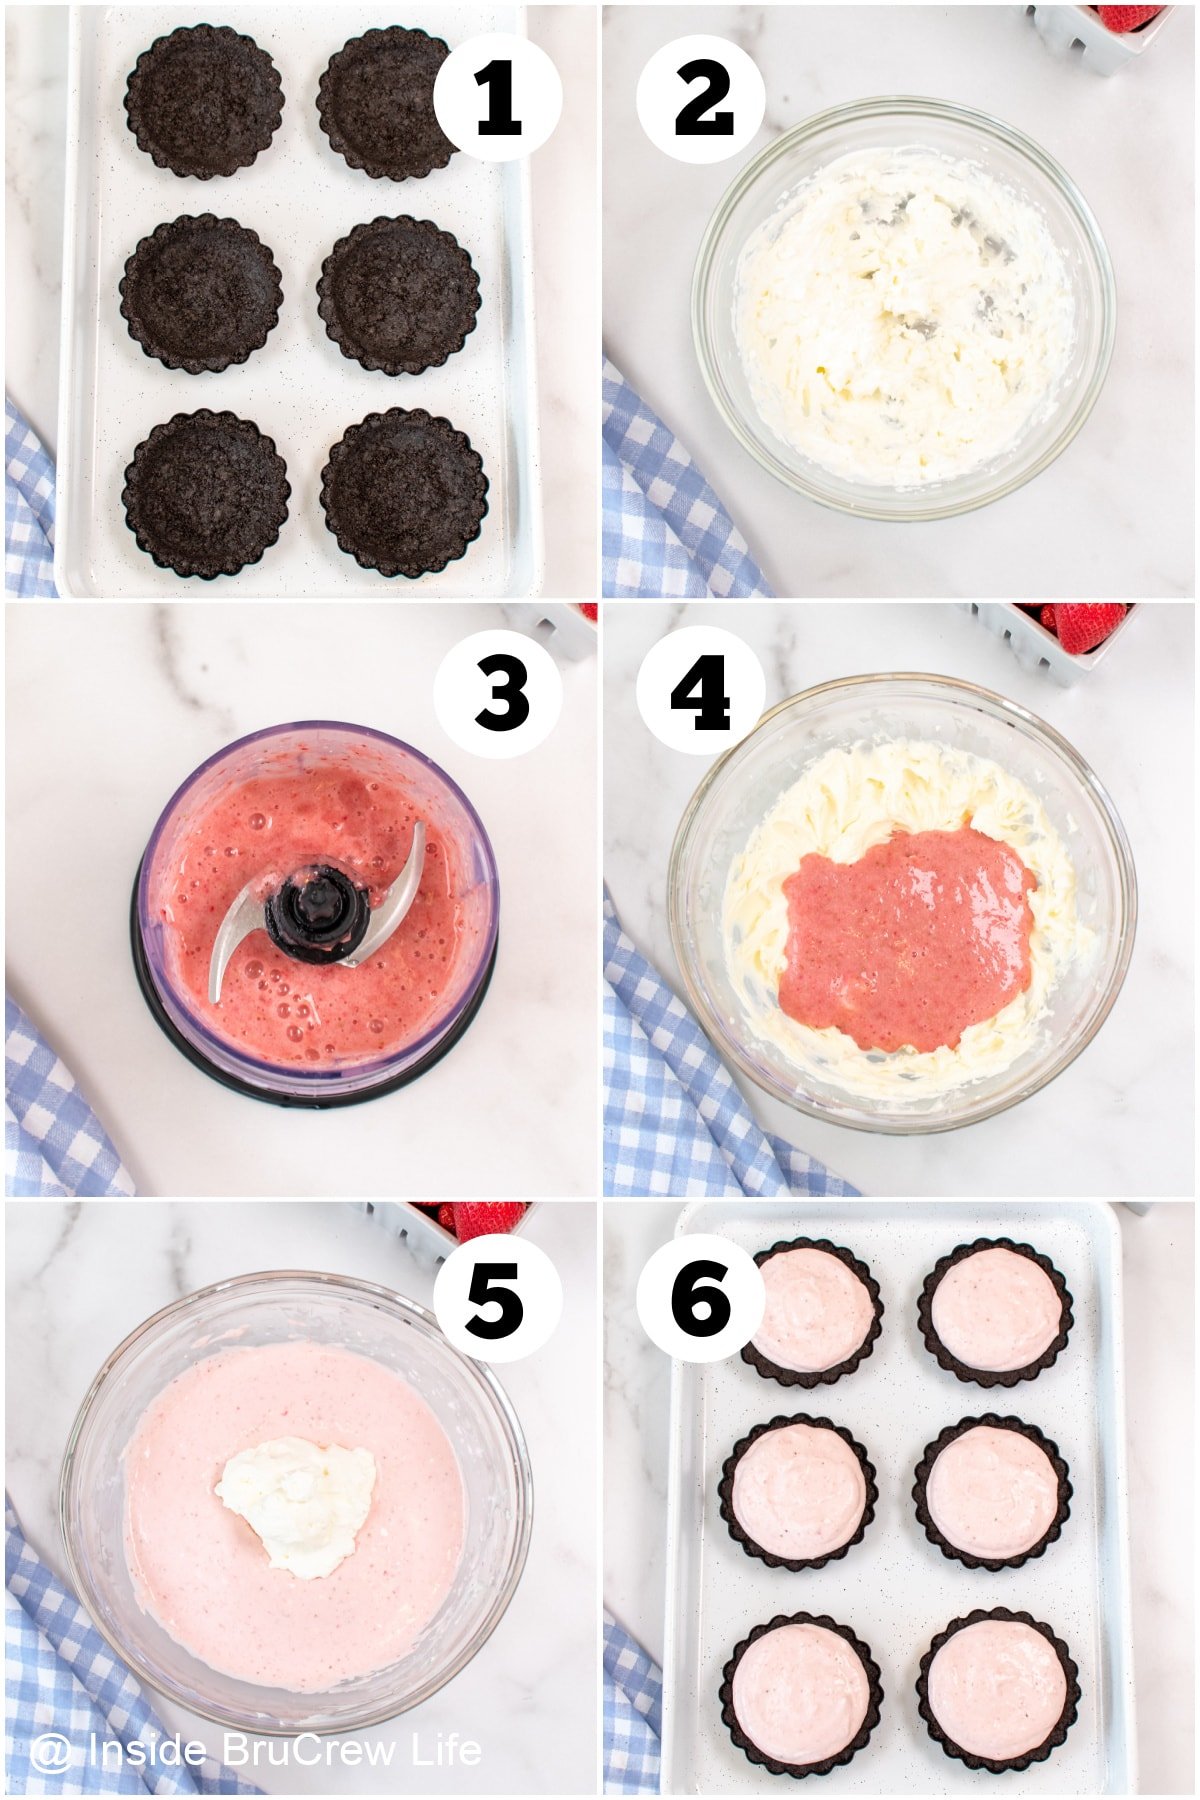 Six pictures collaged together showing how to make fluffy strawberry mousse tarts.